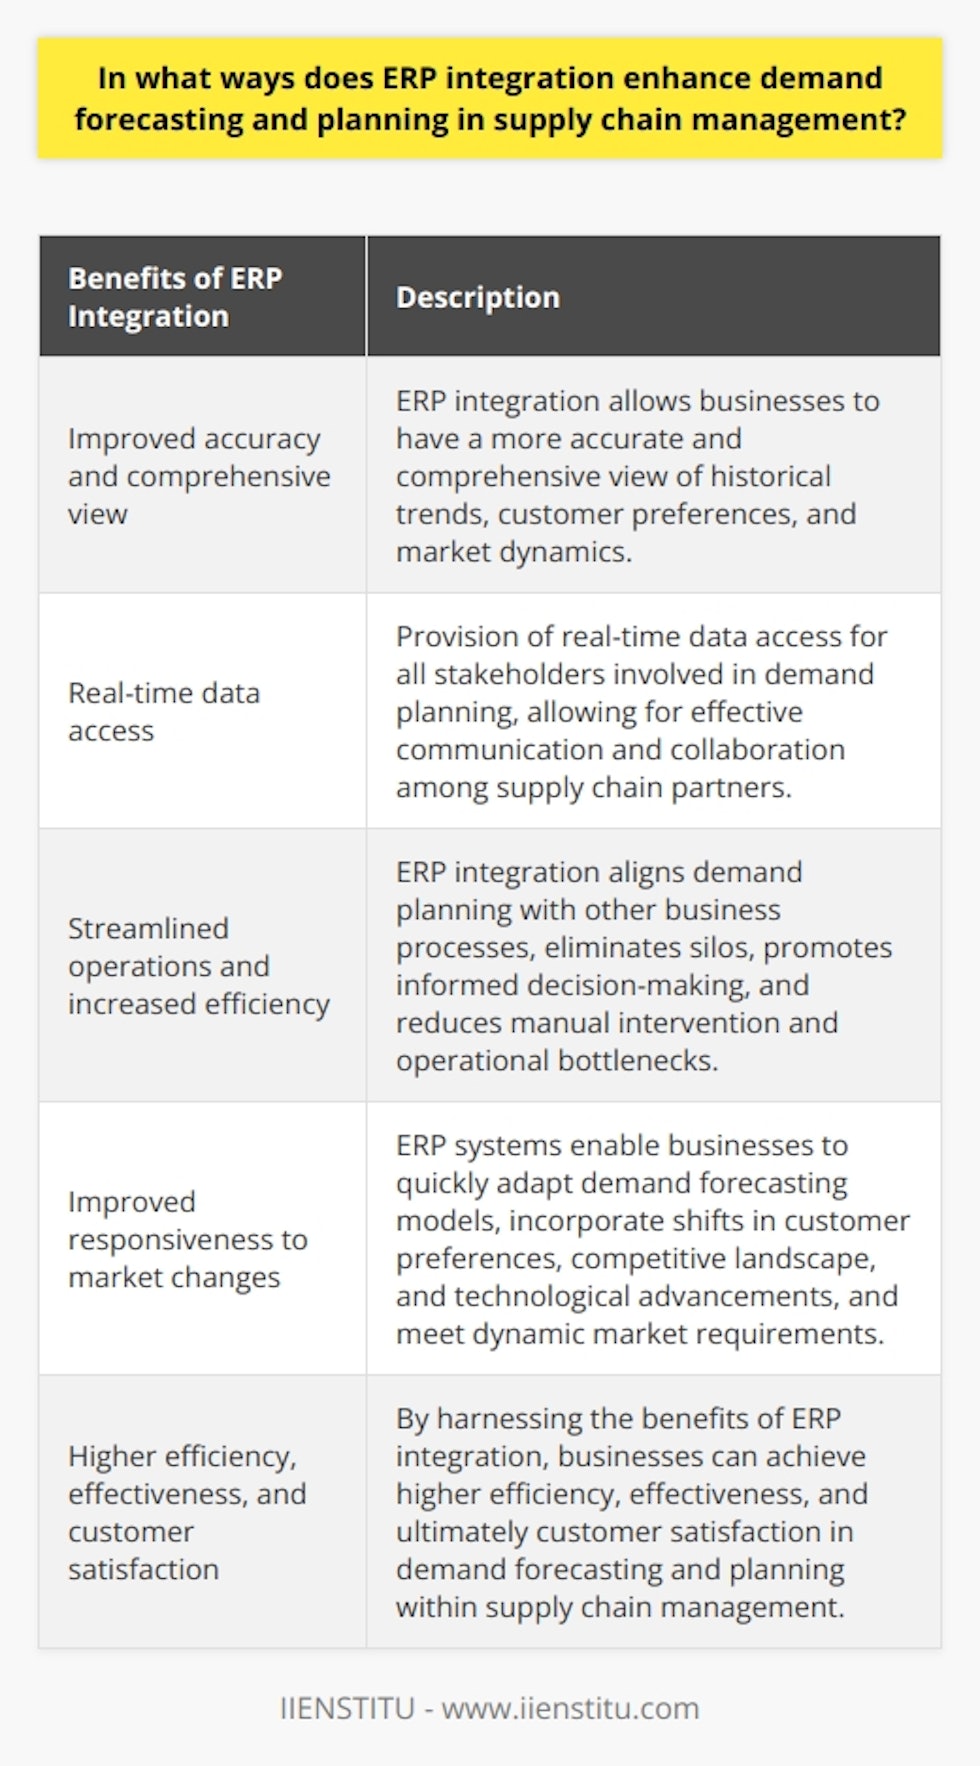 Enterprise Resource Planning (ERP) integration is a vital component in improving demand forecasting and planning within supply chain management. This integration allows businesses to have a more accurate and comprehensive view of historical trends, customer preferences, and market dynamics by bringing together various data sources. In doing so, ERP systems help minimize errors in predicting demand and reduce the bullwhip effect, which can lead to costly consequences such as excess inventory or stockouts.One of the key benefits of ERP integration is the provision of real-time data access for all stakeholders involved in demand planning. This allows for more effective communication and collaboration among supply chain partners, such as suppliers, manufacturers, distributors, and retailers. With this real-time access, organizations can address potential challenges proactively, synchronize production and distribution processes, and optimize their response to fluctuations in demand.Furthermore, ERP integration streamlines supply chain operations and increases overall efficiency. By aligning demand planning with other business processes, such as inventory management, procurement, production, and sales, ERP systems eliminate silos and promote more informed decision-making. Automated workflows and standardized procedures driven by ERP systems also reduce manual intervention and the risk of human errors, resulting in fewer operational bottlenecks and improved process efficiency.Perhaps one of the most significant advantages of ERP integration is the ability to improve responsiveness to market changes and customer demands. With ERP systems, businesses can quickly adapt their demand forecasting models to incorporate shifts in customer preferences, the competitive landscape, and technological advancements. This proactive approach enables organizations to stay ahead of the curve and meet dynamic market requirements, ultimately maximizing profit margins.In conclusion, ERP integration plays a crucial role in enhancing demand forecasting and planning within supply chain management. Through improved forecasting accuracy, real-time data access for collaborative planning, streamlined operations, and increased responsiveness to market changes, businesses that utilize ERP systems can achieve higher efficiency, effectiveness, and ultimately customer satisfaction.